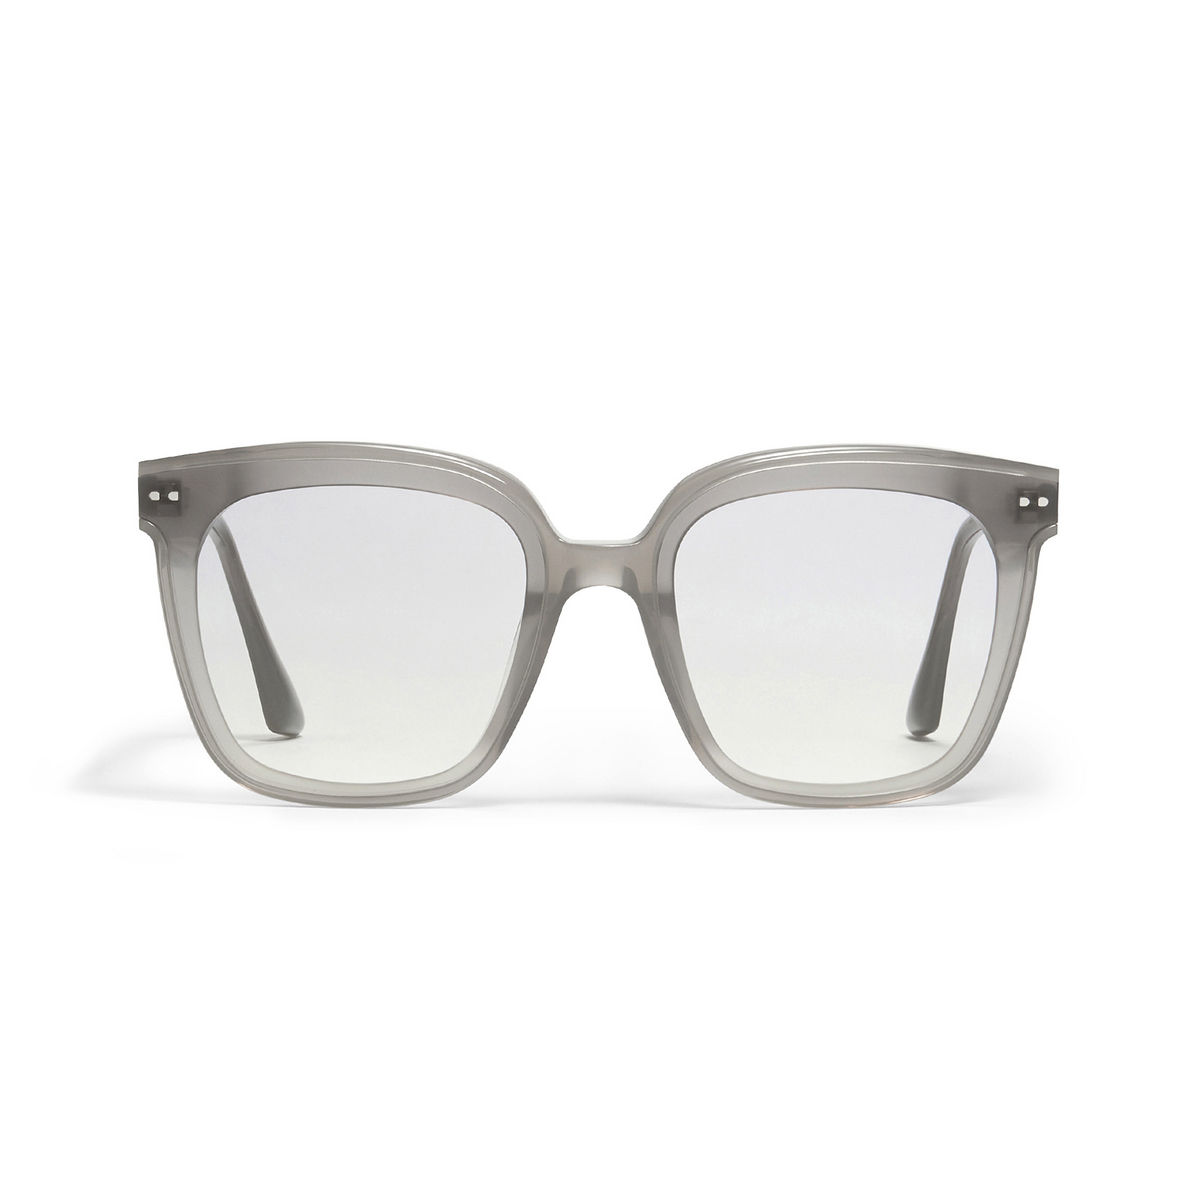 Gentle Monster® Square Sunglasses: Lo Cell color Grey GC3 - front view.